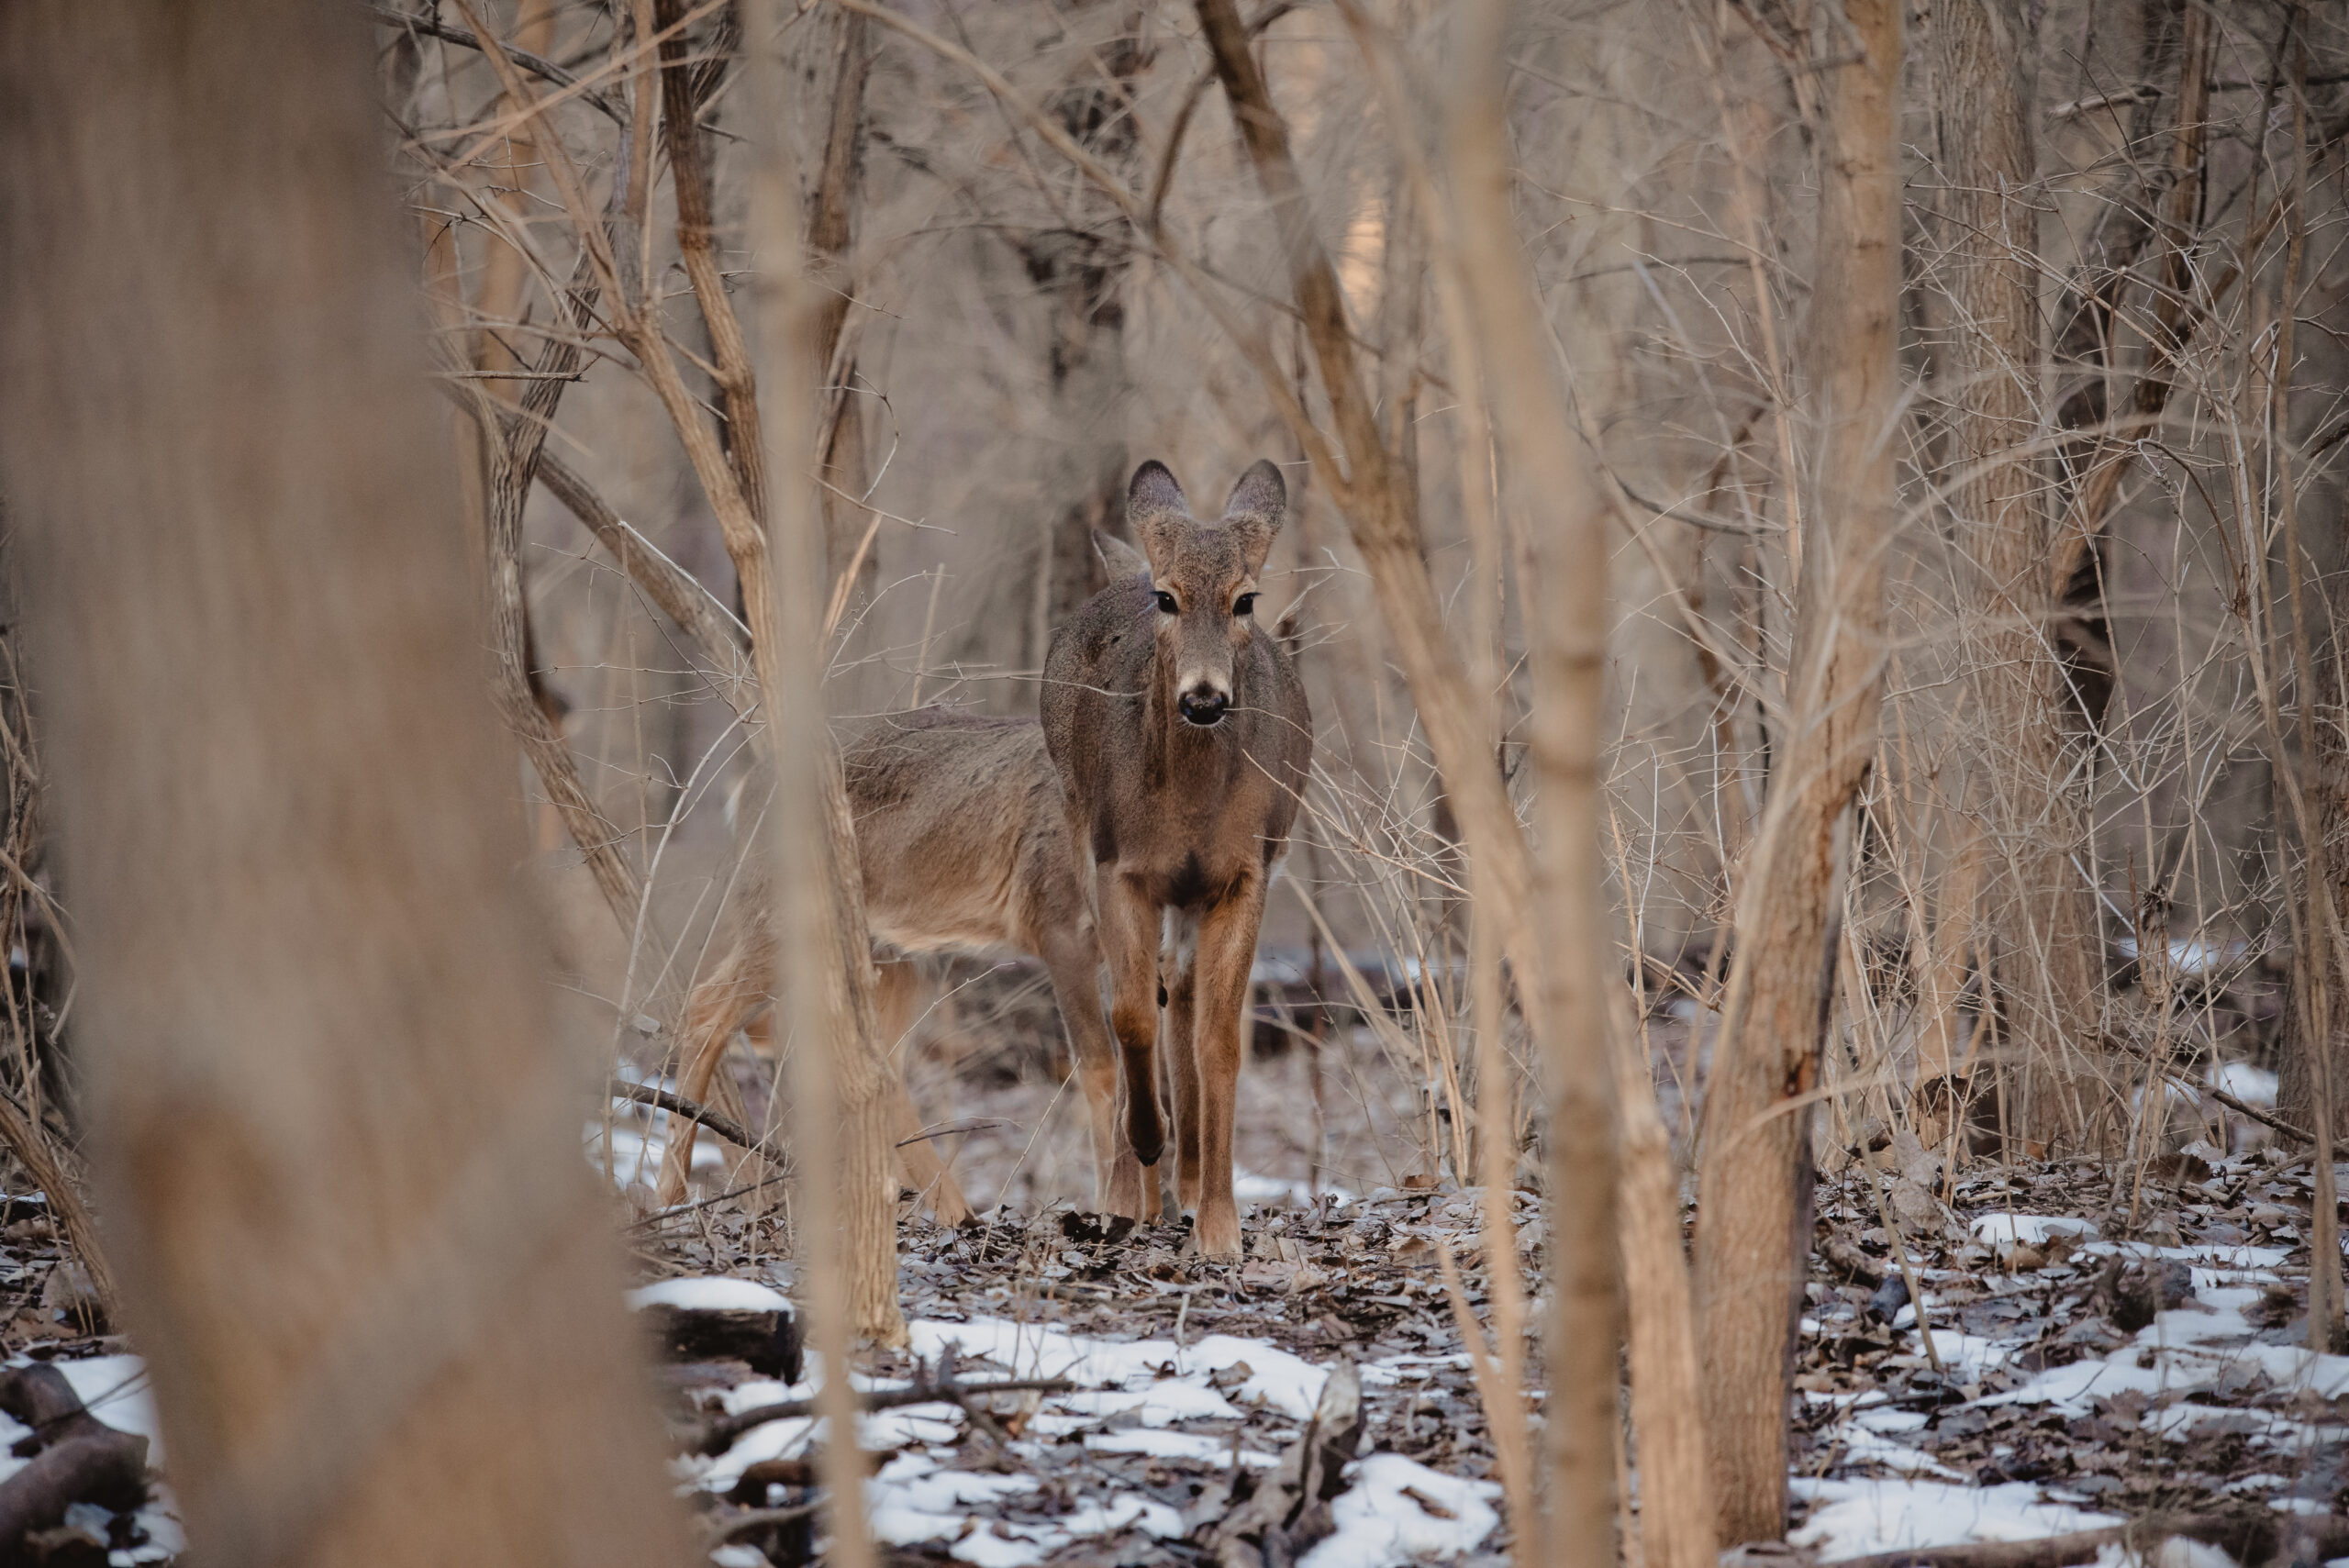 A deer in the woods, with another one out of focus behind it. A smattering of snow on the ground.